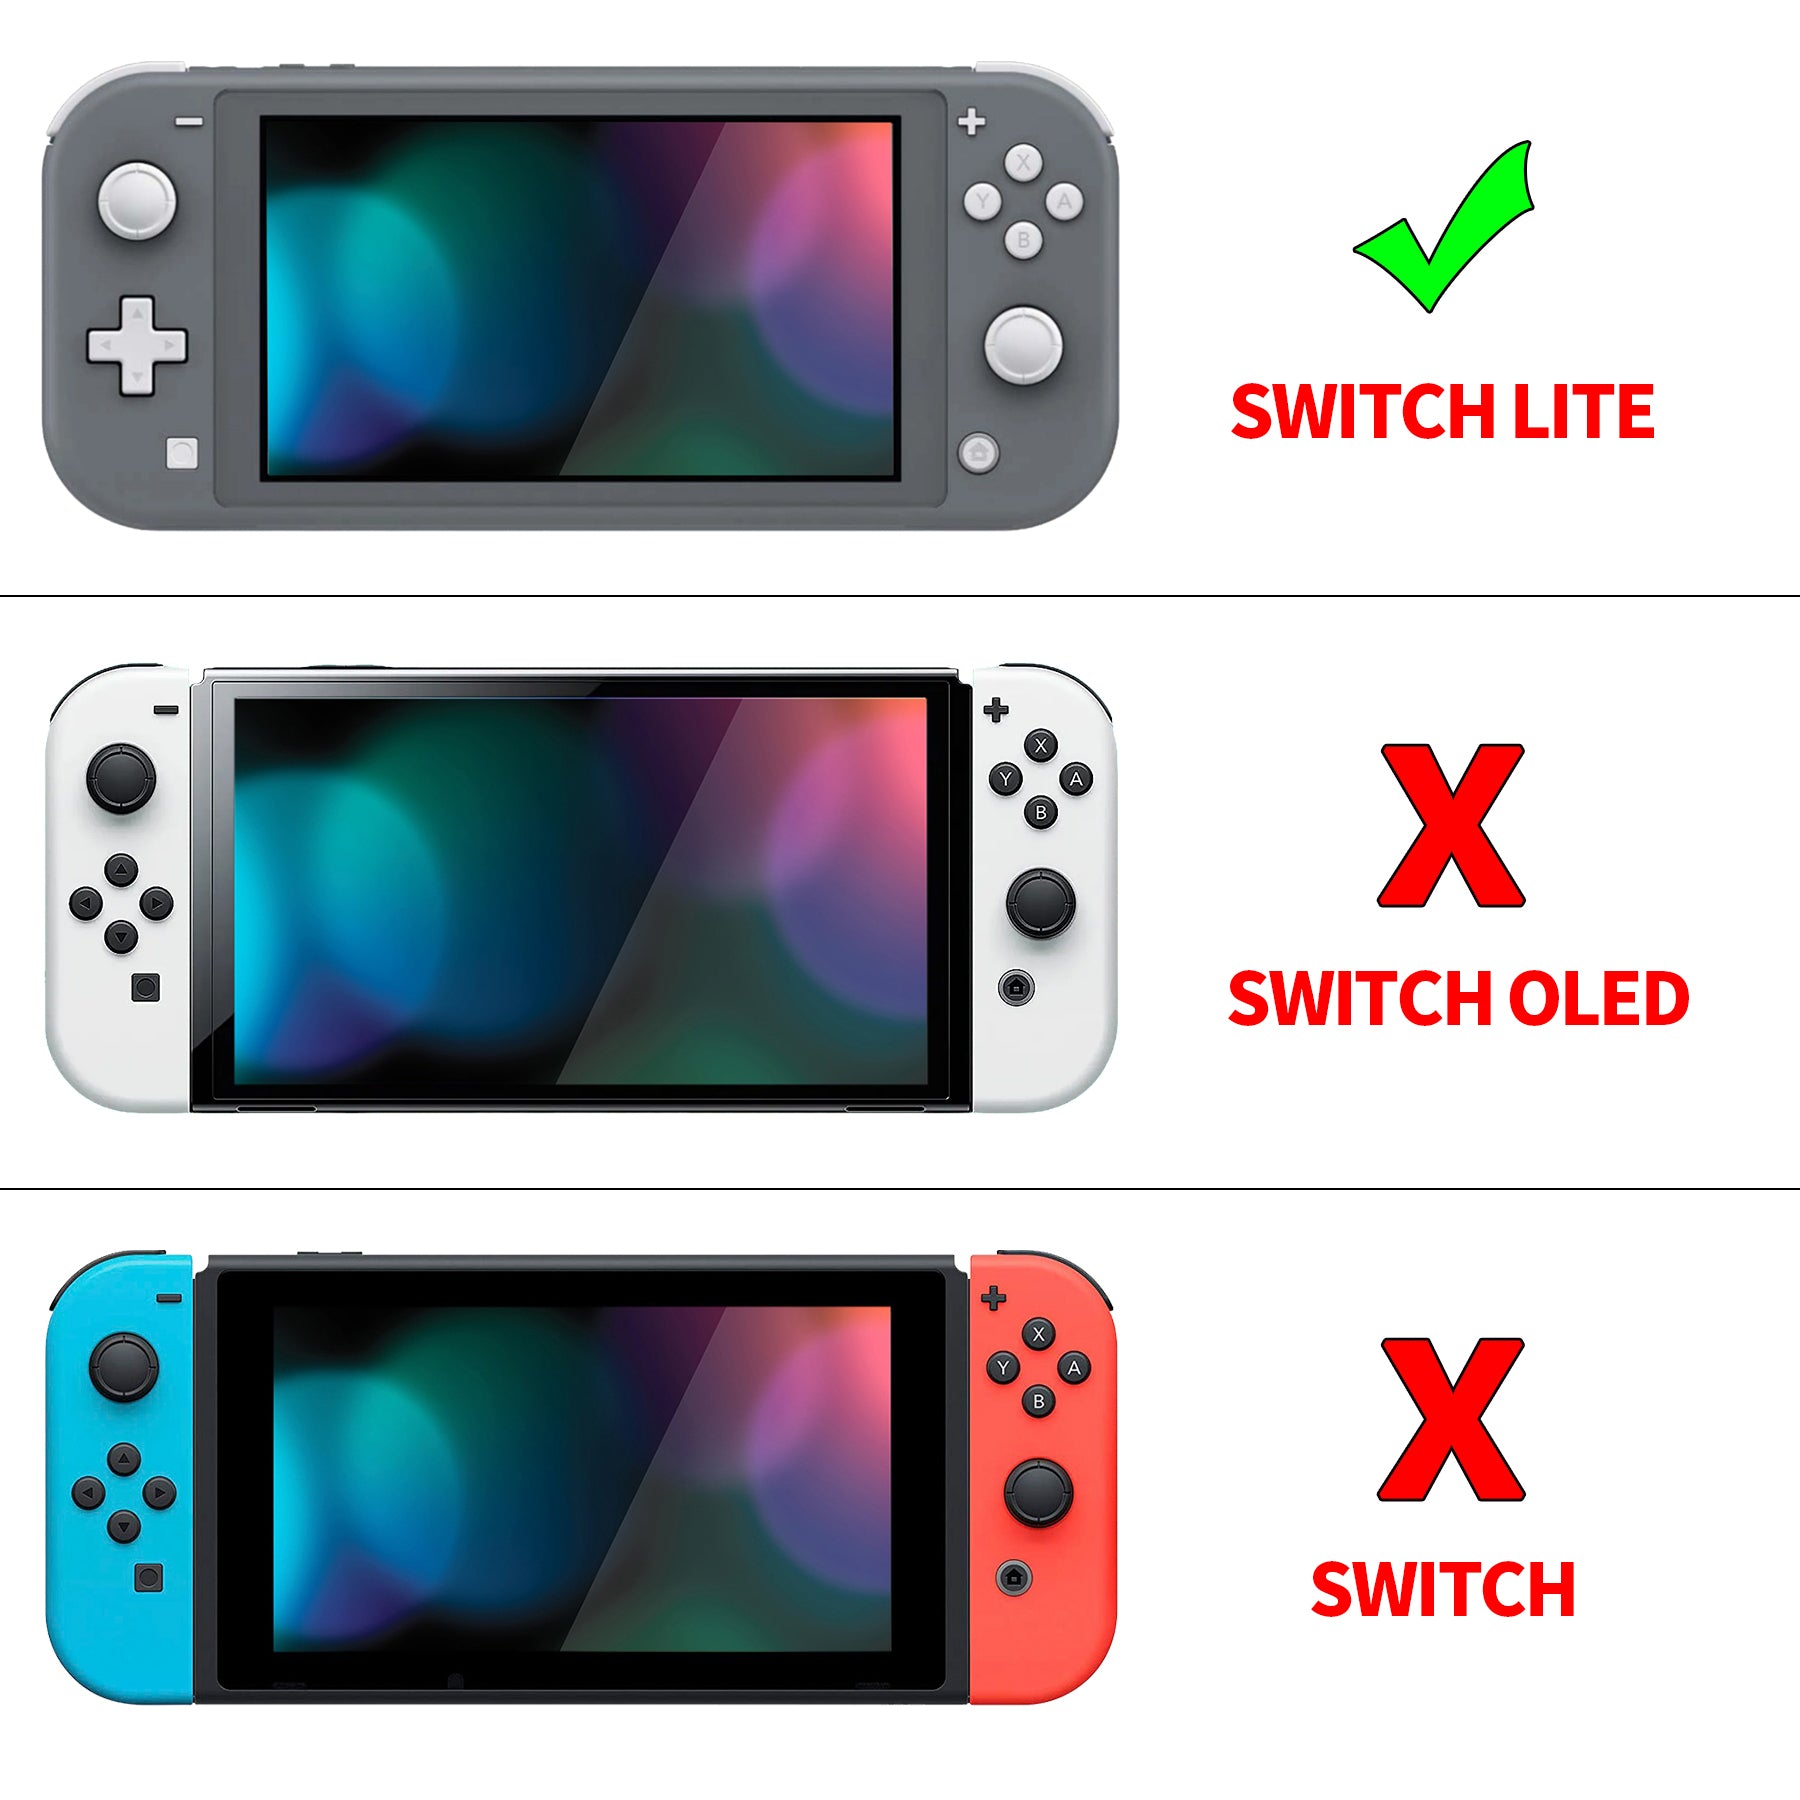 PlayVital ZealProtect Protective Case for Nintendo Switch Lite, Hard Shell Ergonomic Grip Cover for Nintendo Switch Lite w/Screen Protector & Thumb Grip Caps & Button Caps - Gradient Translucent Bluebell - PSLYP3011 playvital